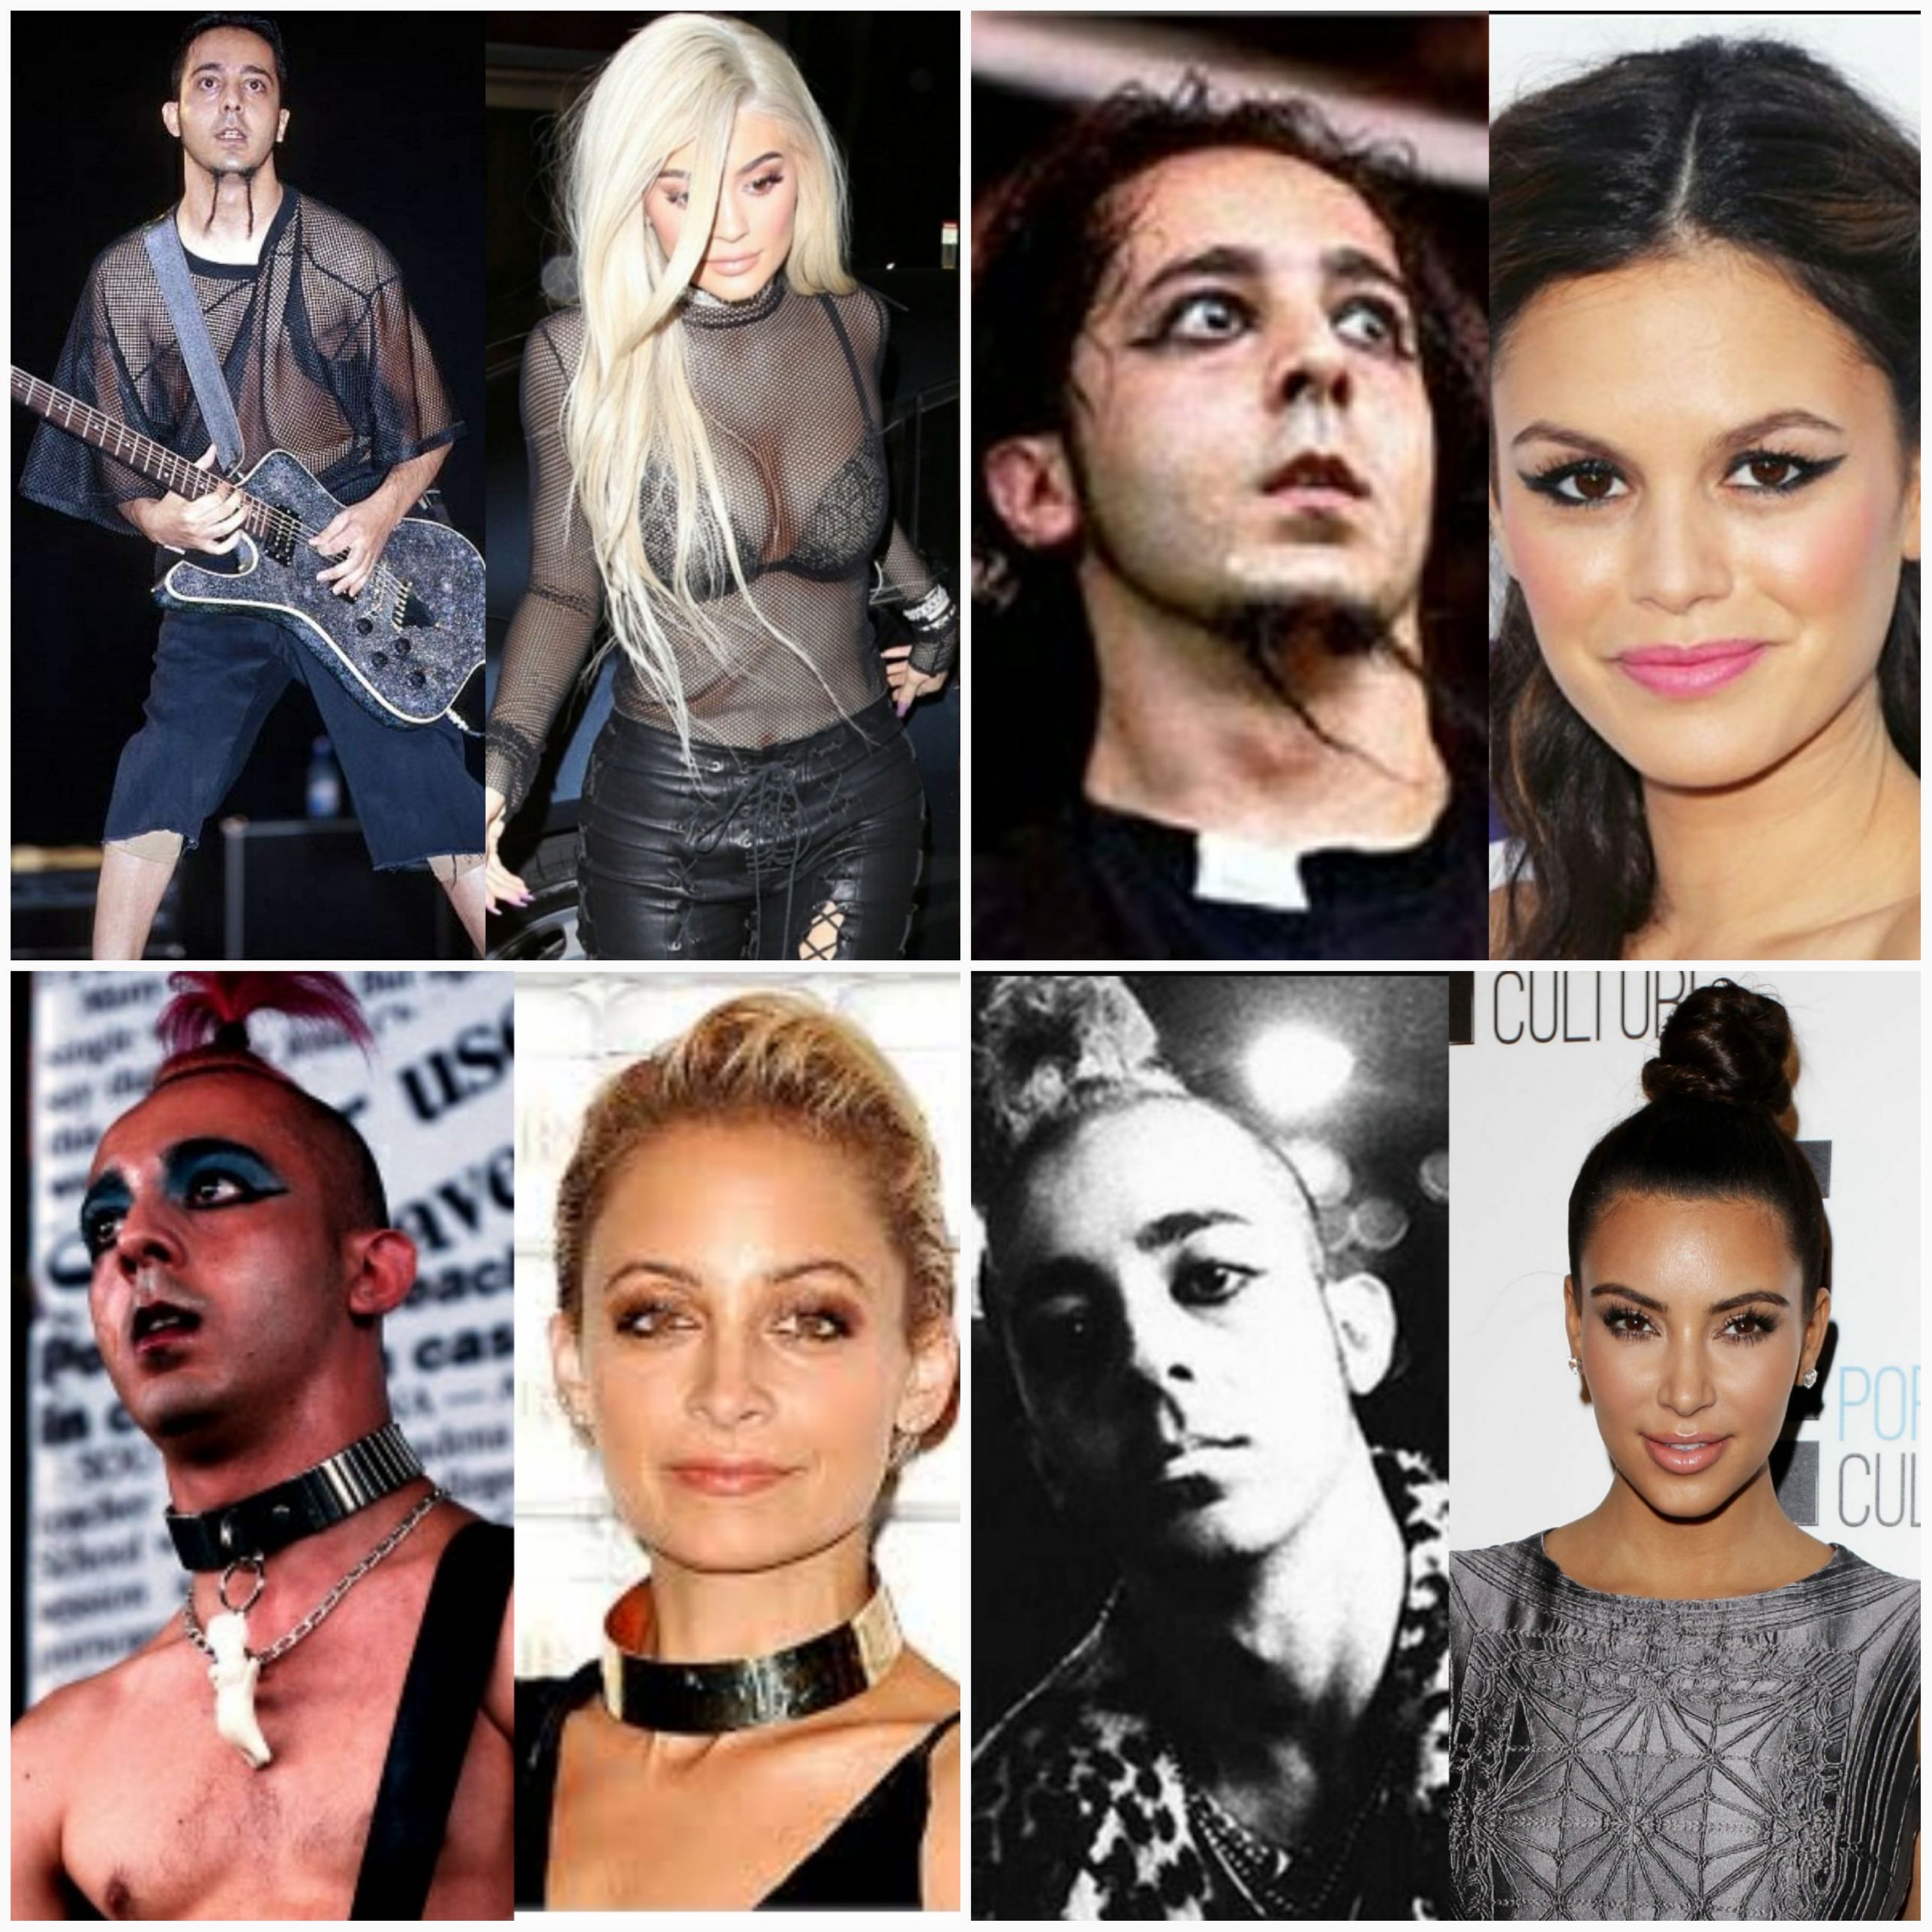 All modern female celebrity fashion was inspired by System of a Down guitarist Daron Malakian back in 1998